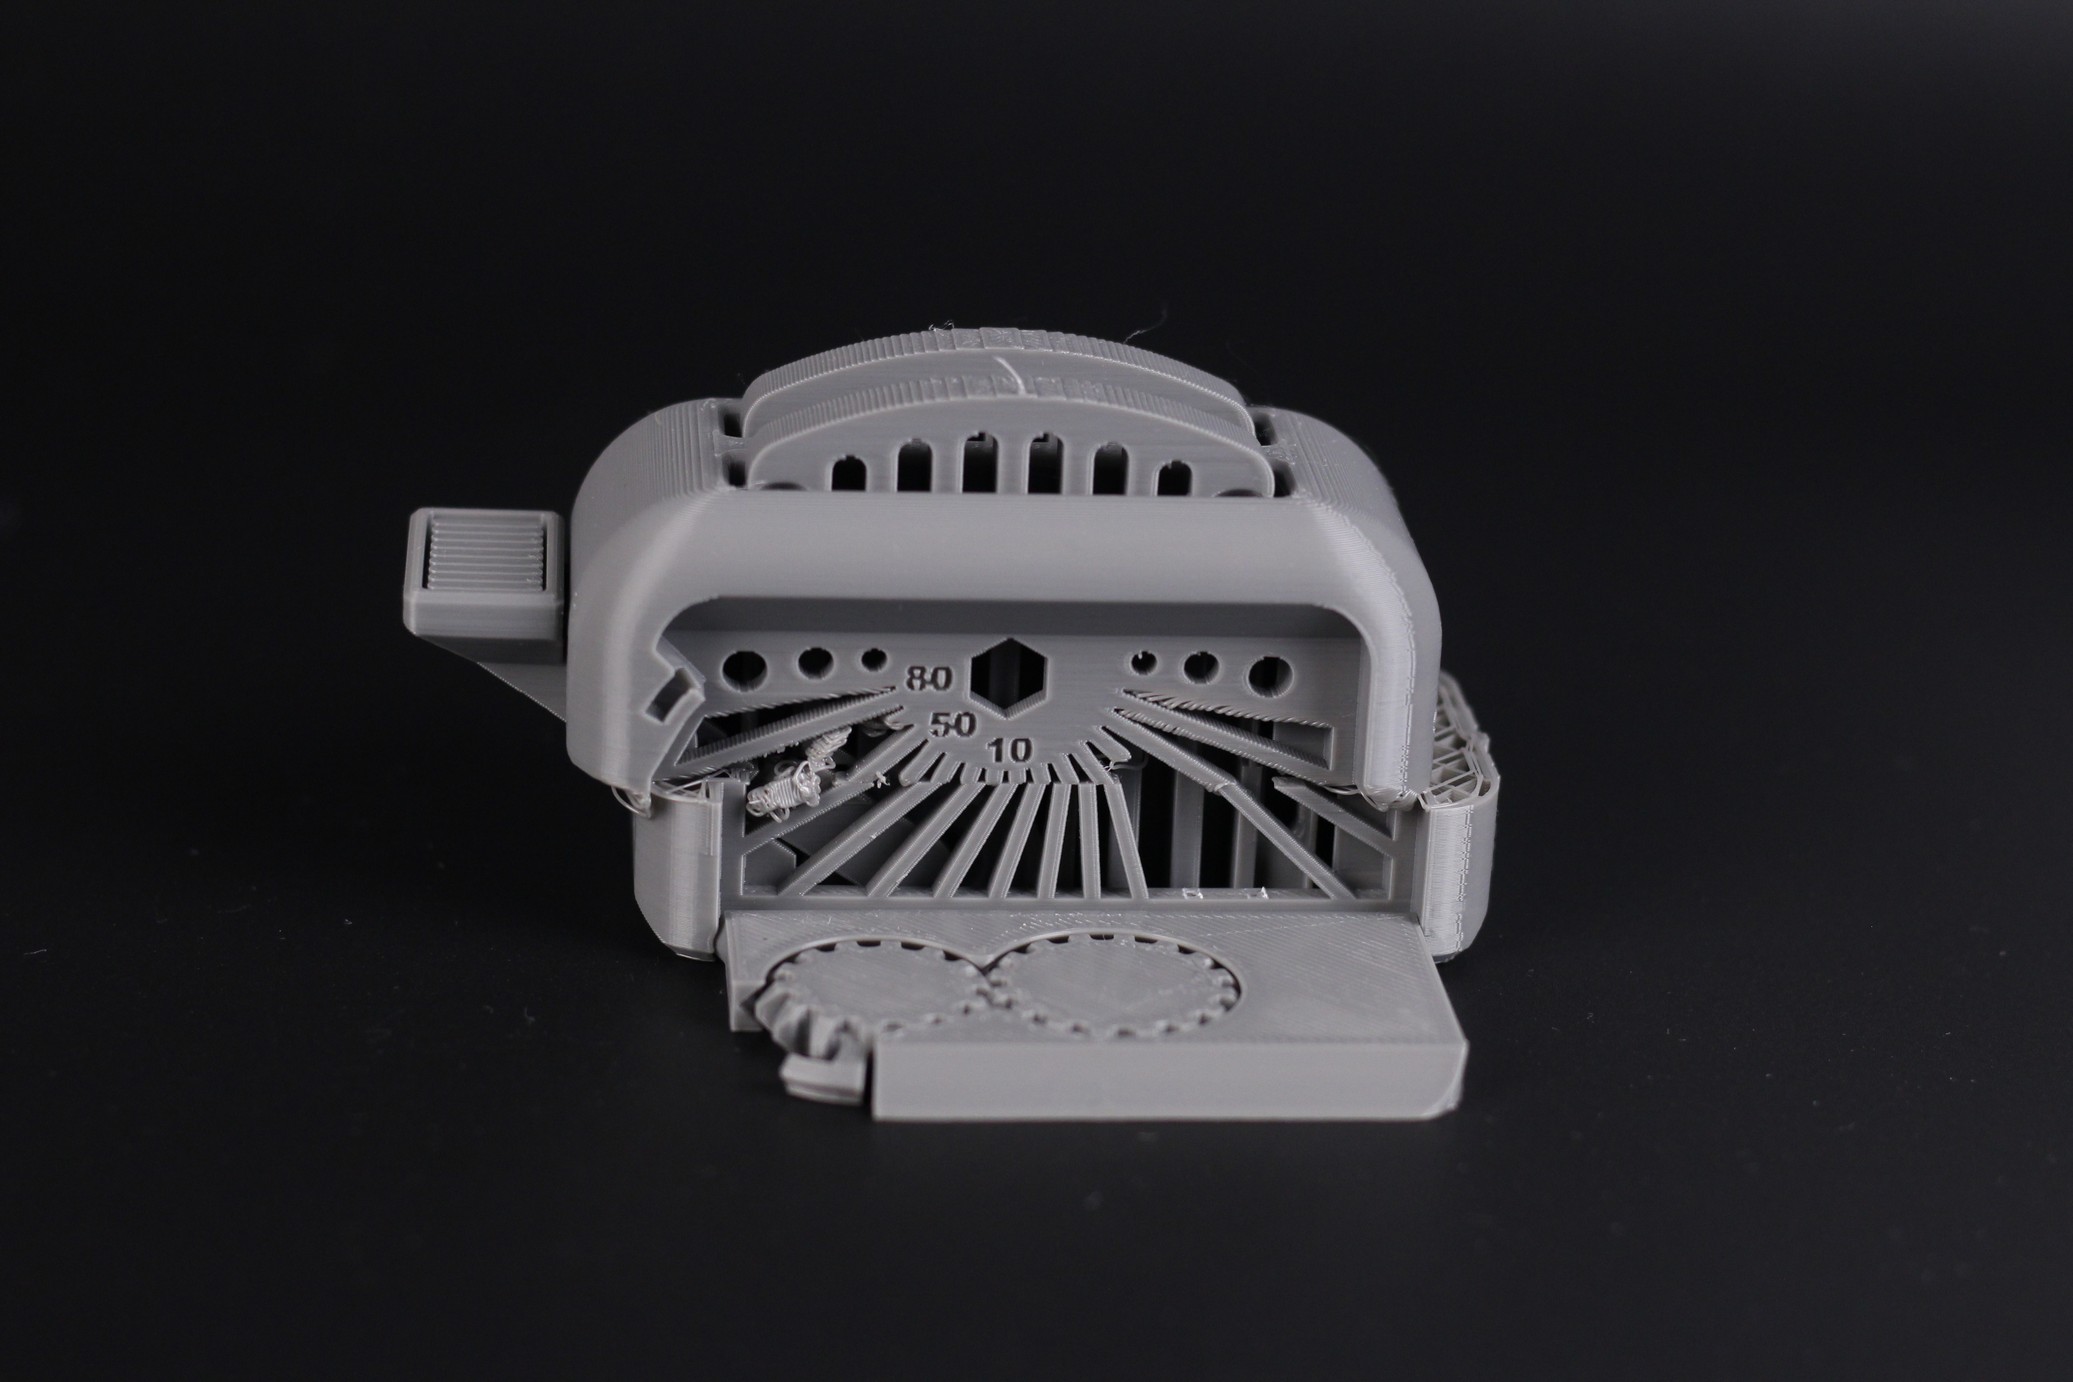 Torture Toaster printed on Anycubic Kobra 4 | Anycubic Kobra Review: The New Budget Standard